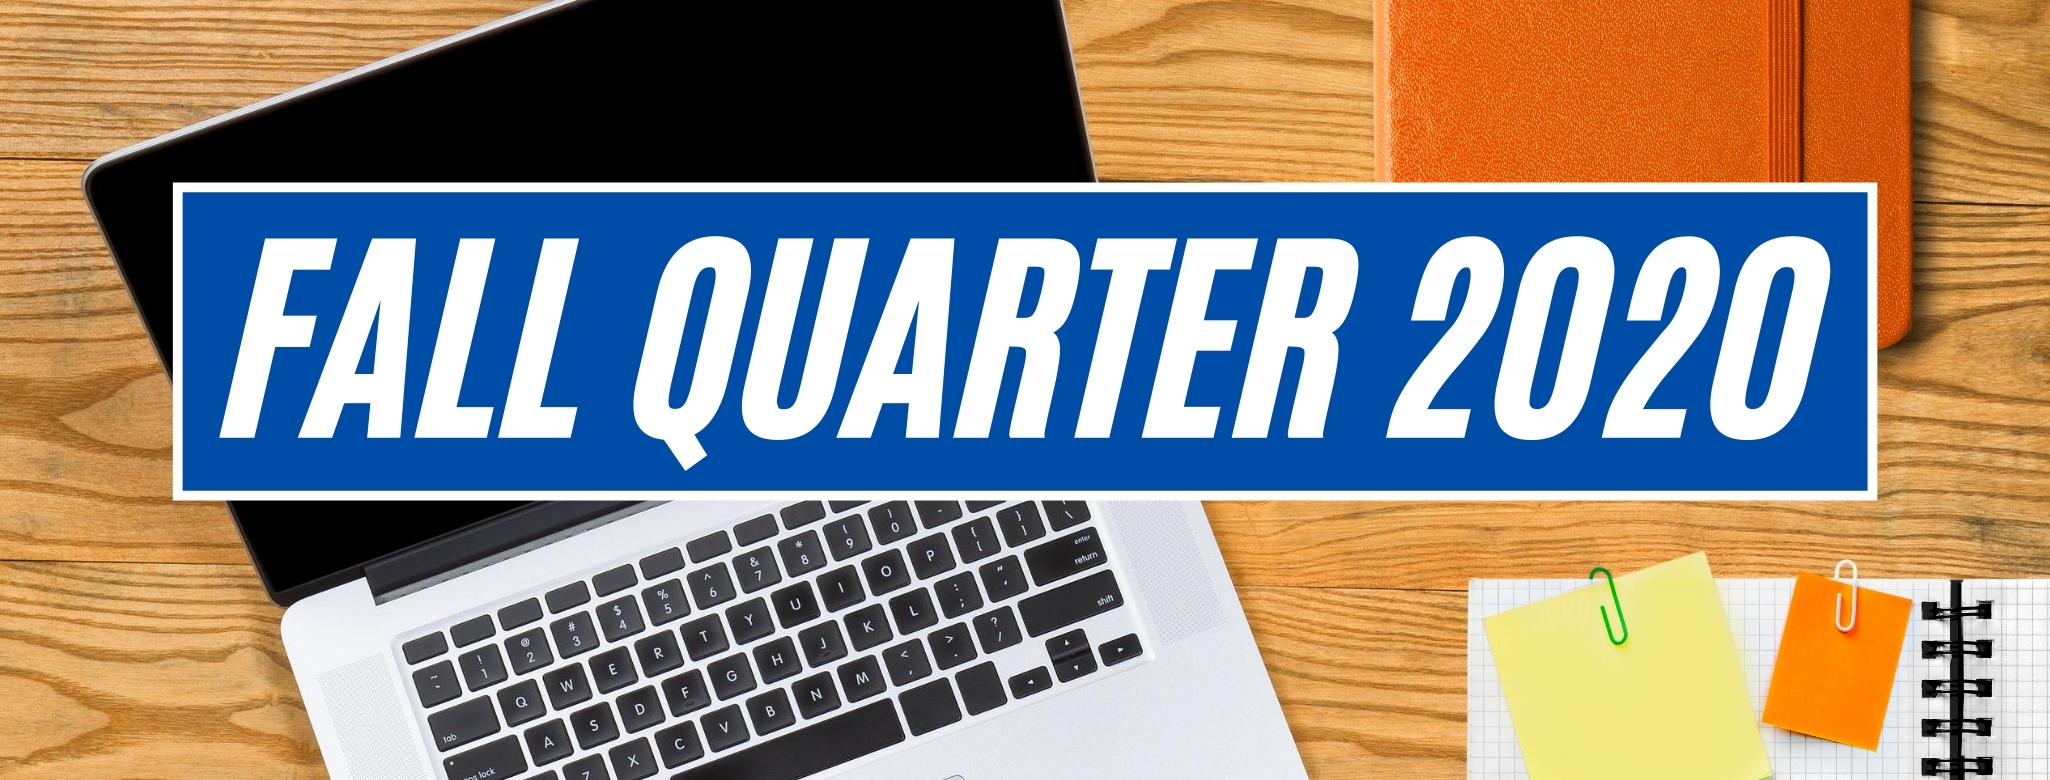 Fall Quarter 2020 Starts Sept. 29! | South Seattle College